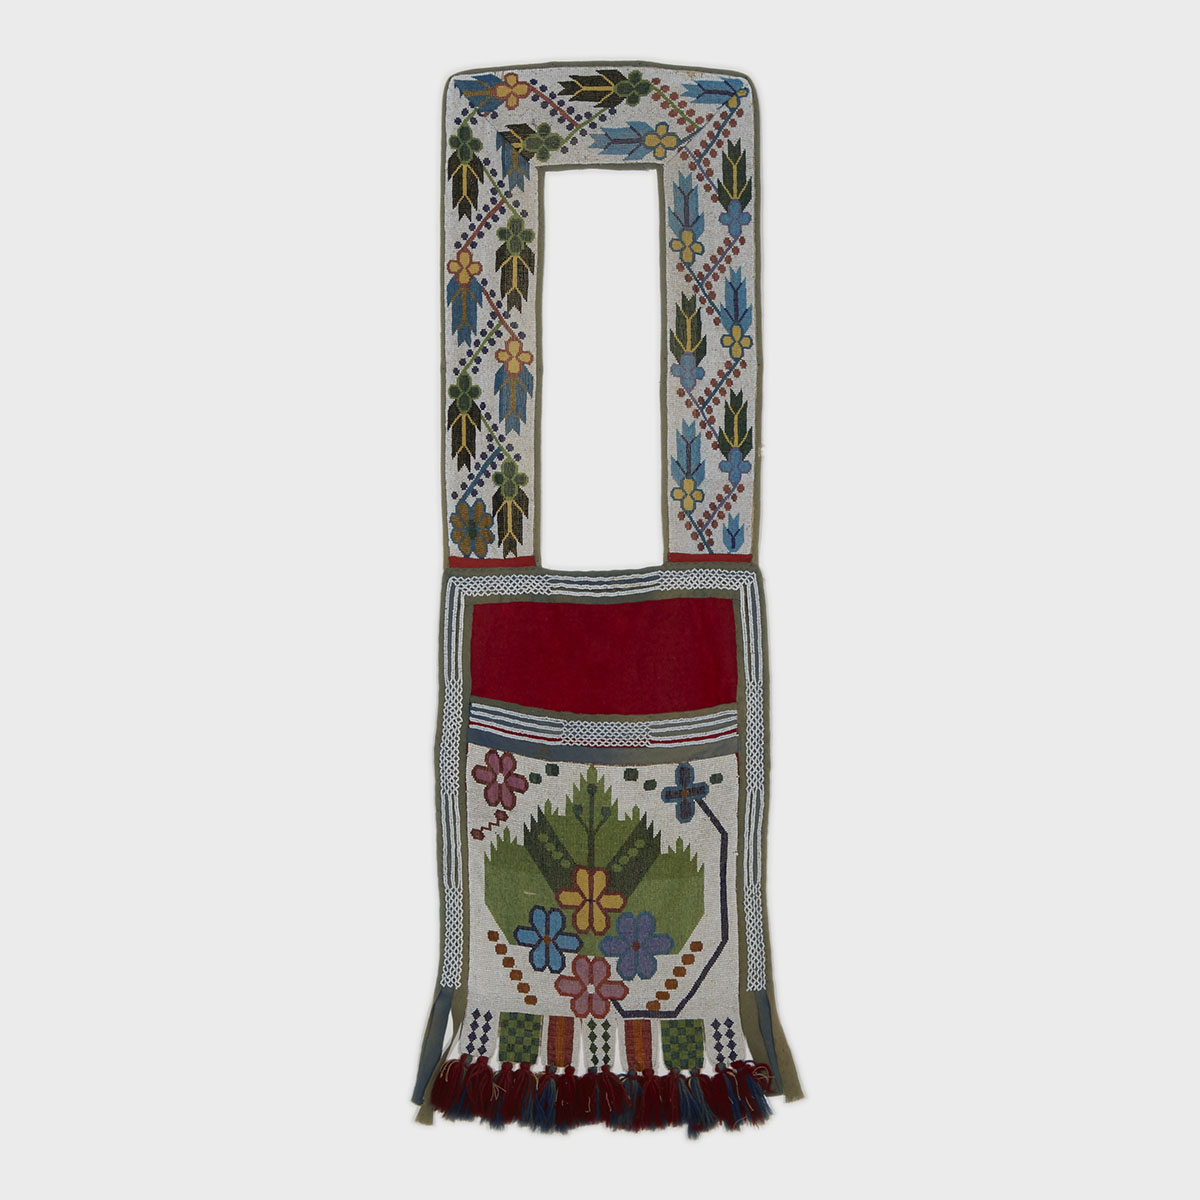 Ojibwa or Pottawatomie Beaded Wool Bandolier Bag, Eastern Woodlands, late 19th/early 20th  century